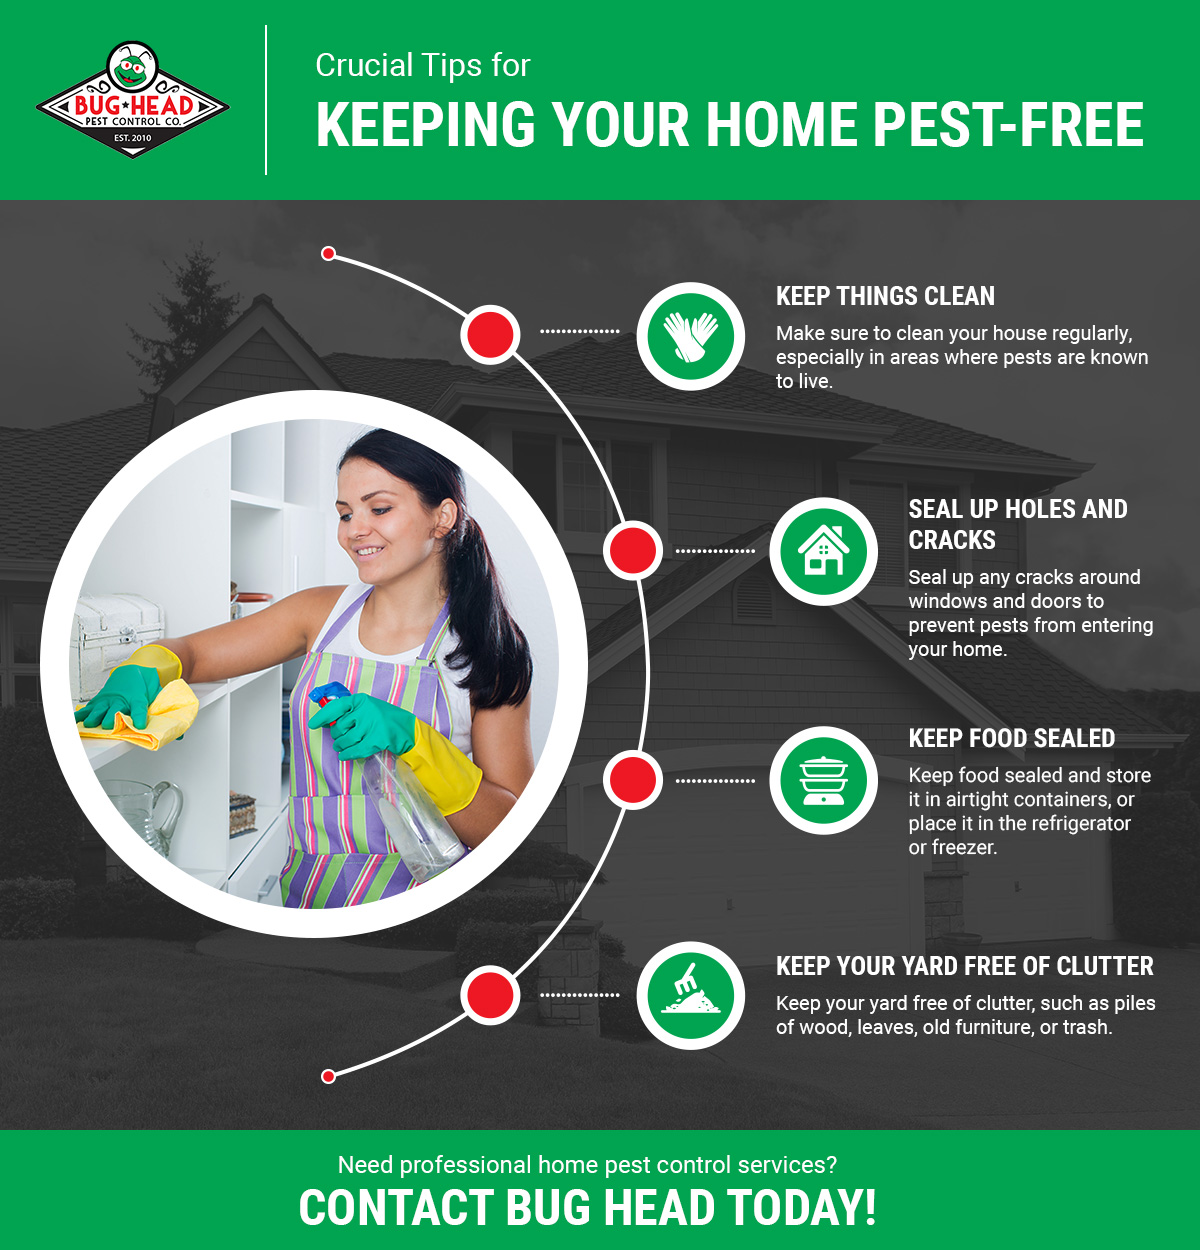 Crucial Tips for Keeping Your Home Pest-Free Infographic